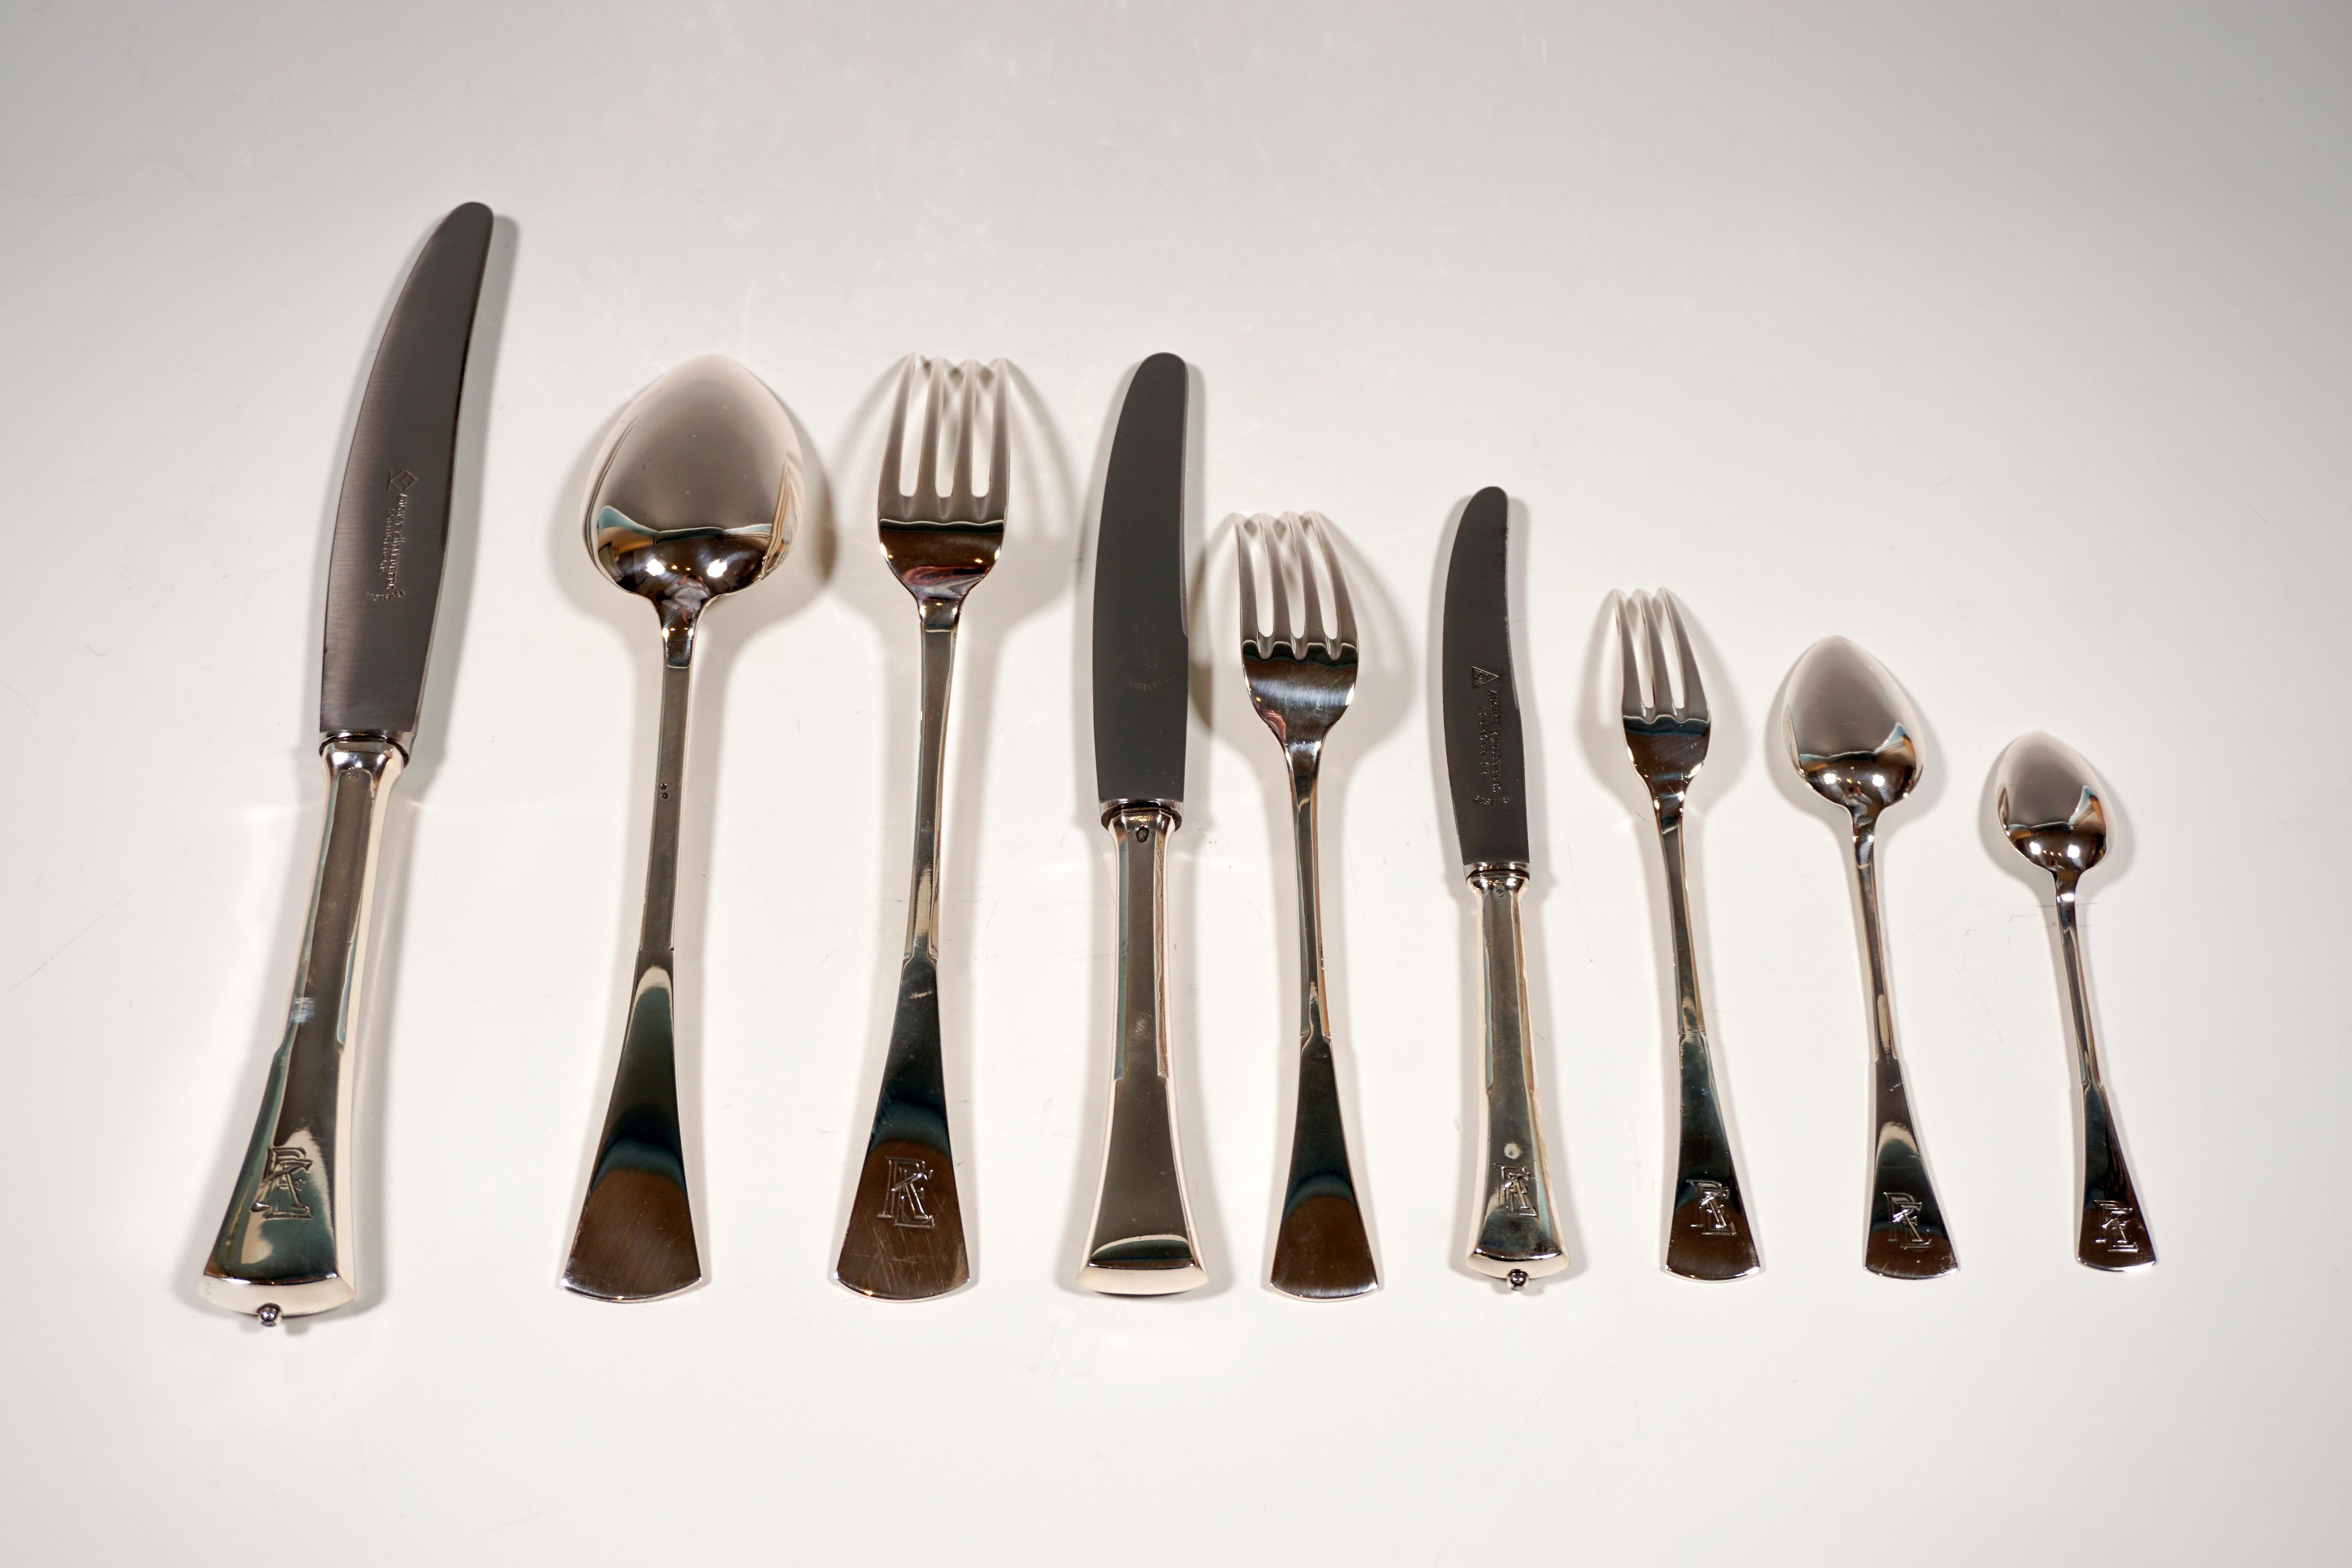 Art Nouveau Silver Cutlery Set For 12 People In Showcase, Austria-Hungary, 1920 3